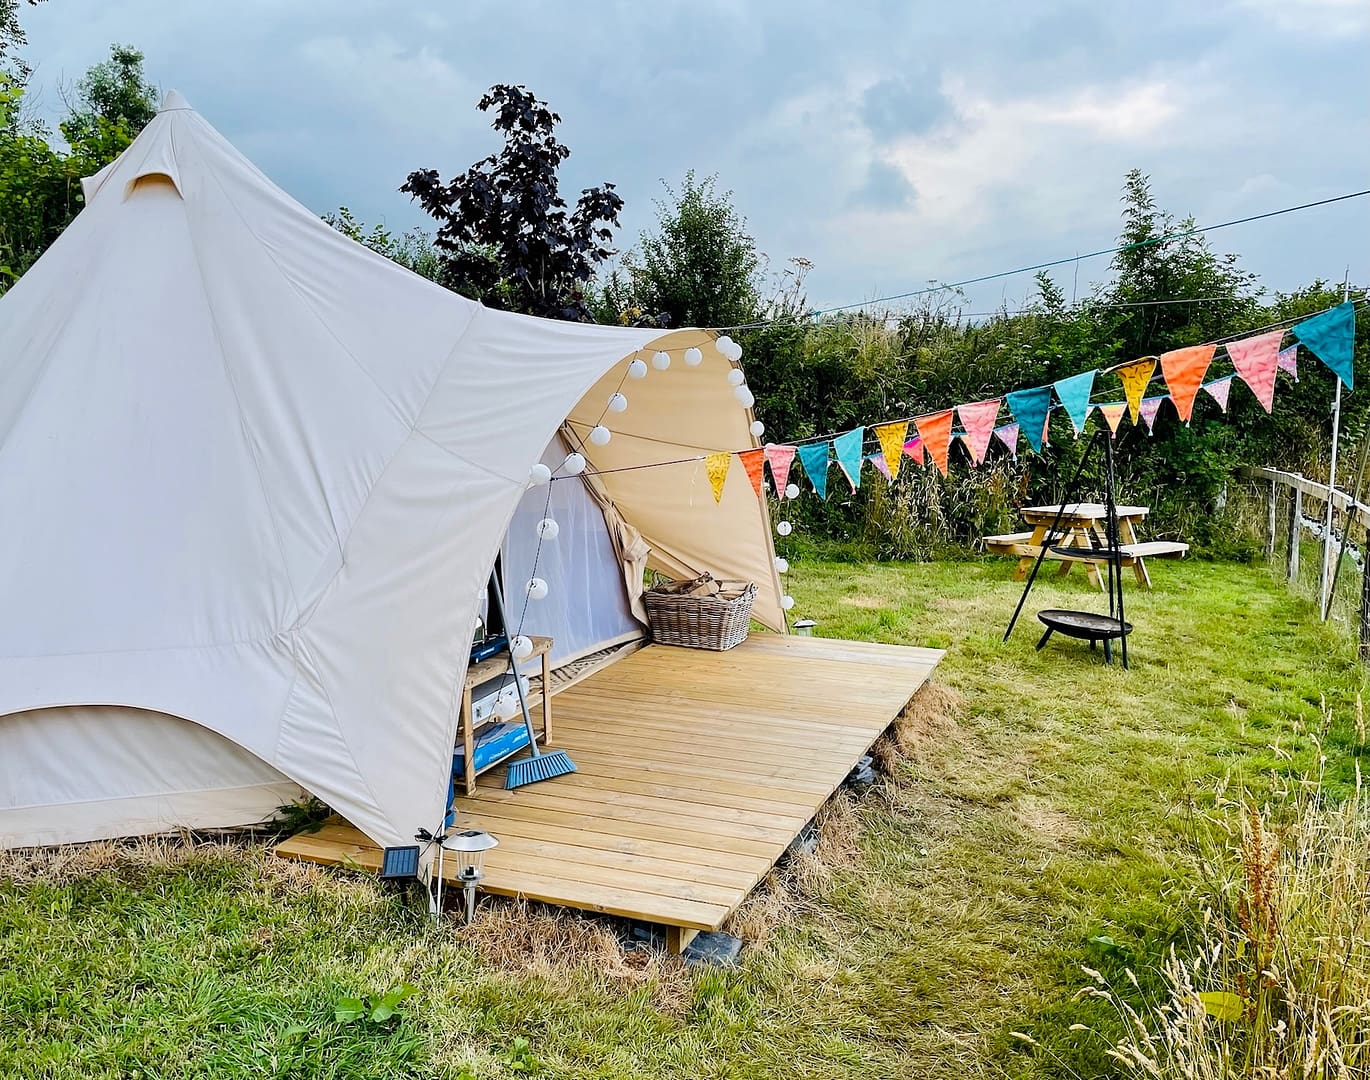 All we need is a Bell Tent...